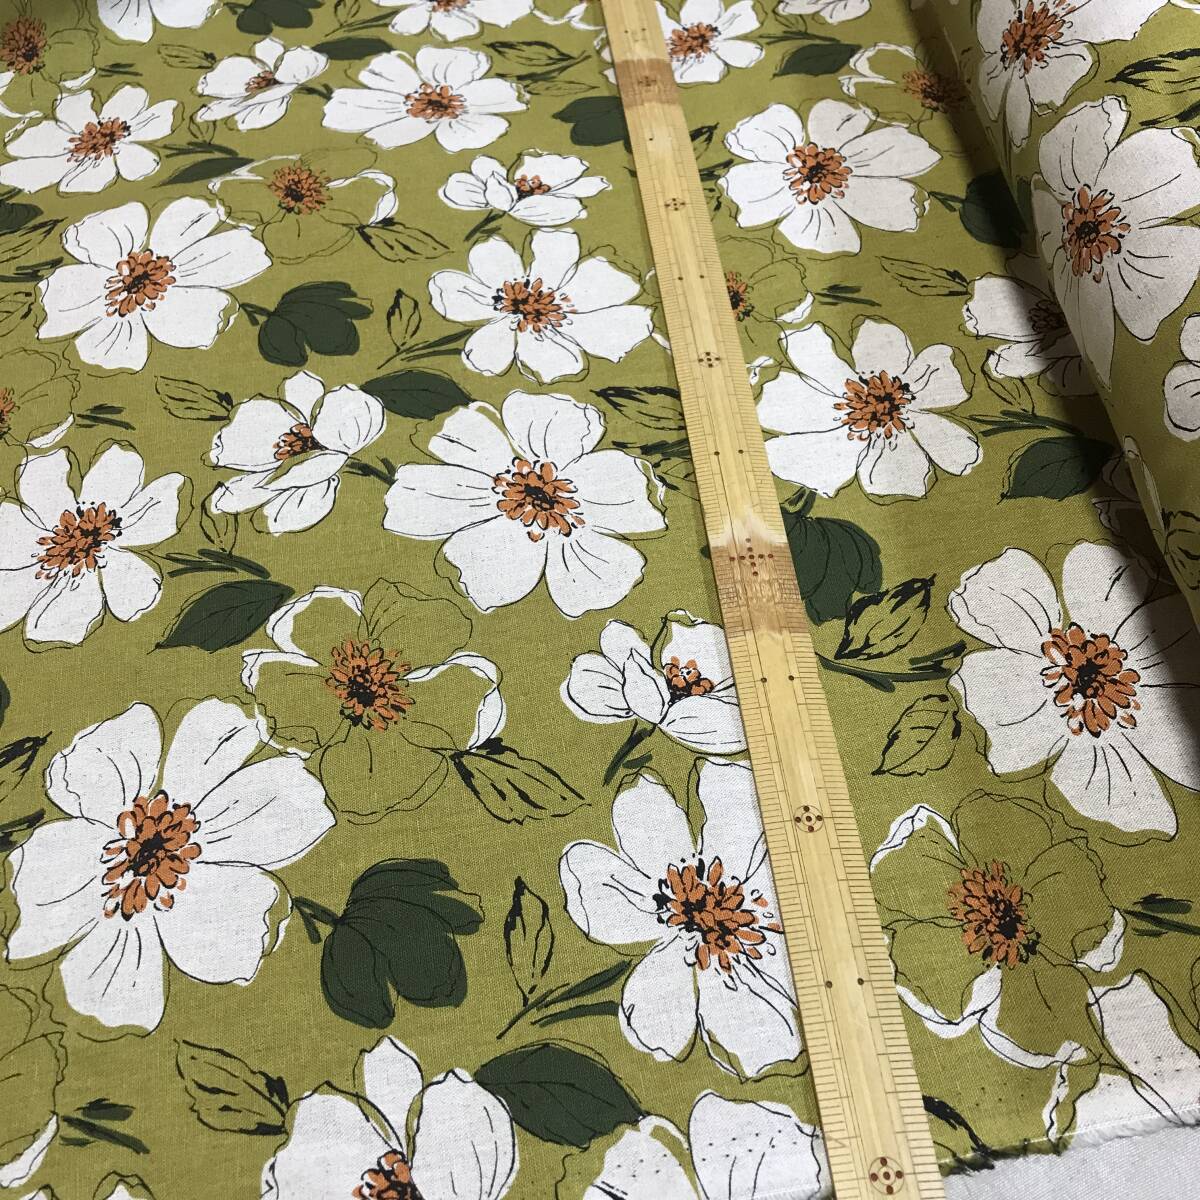  made in Japan 3m cotton flax canvas floral print cloth is gire